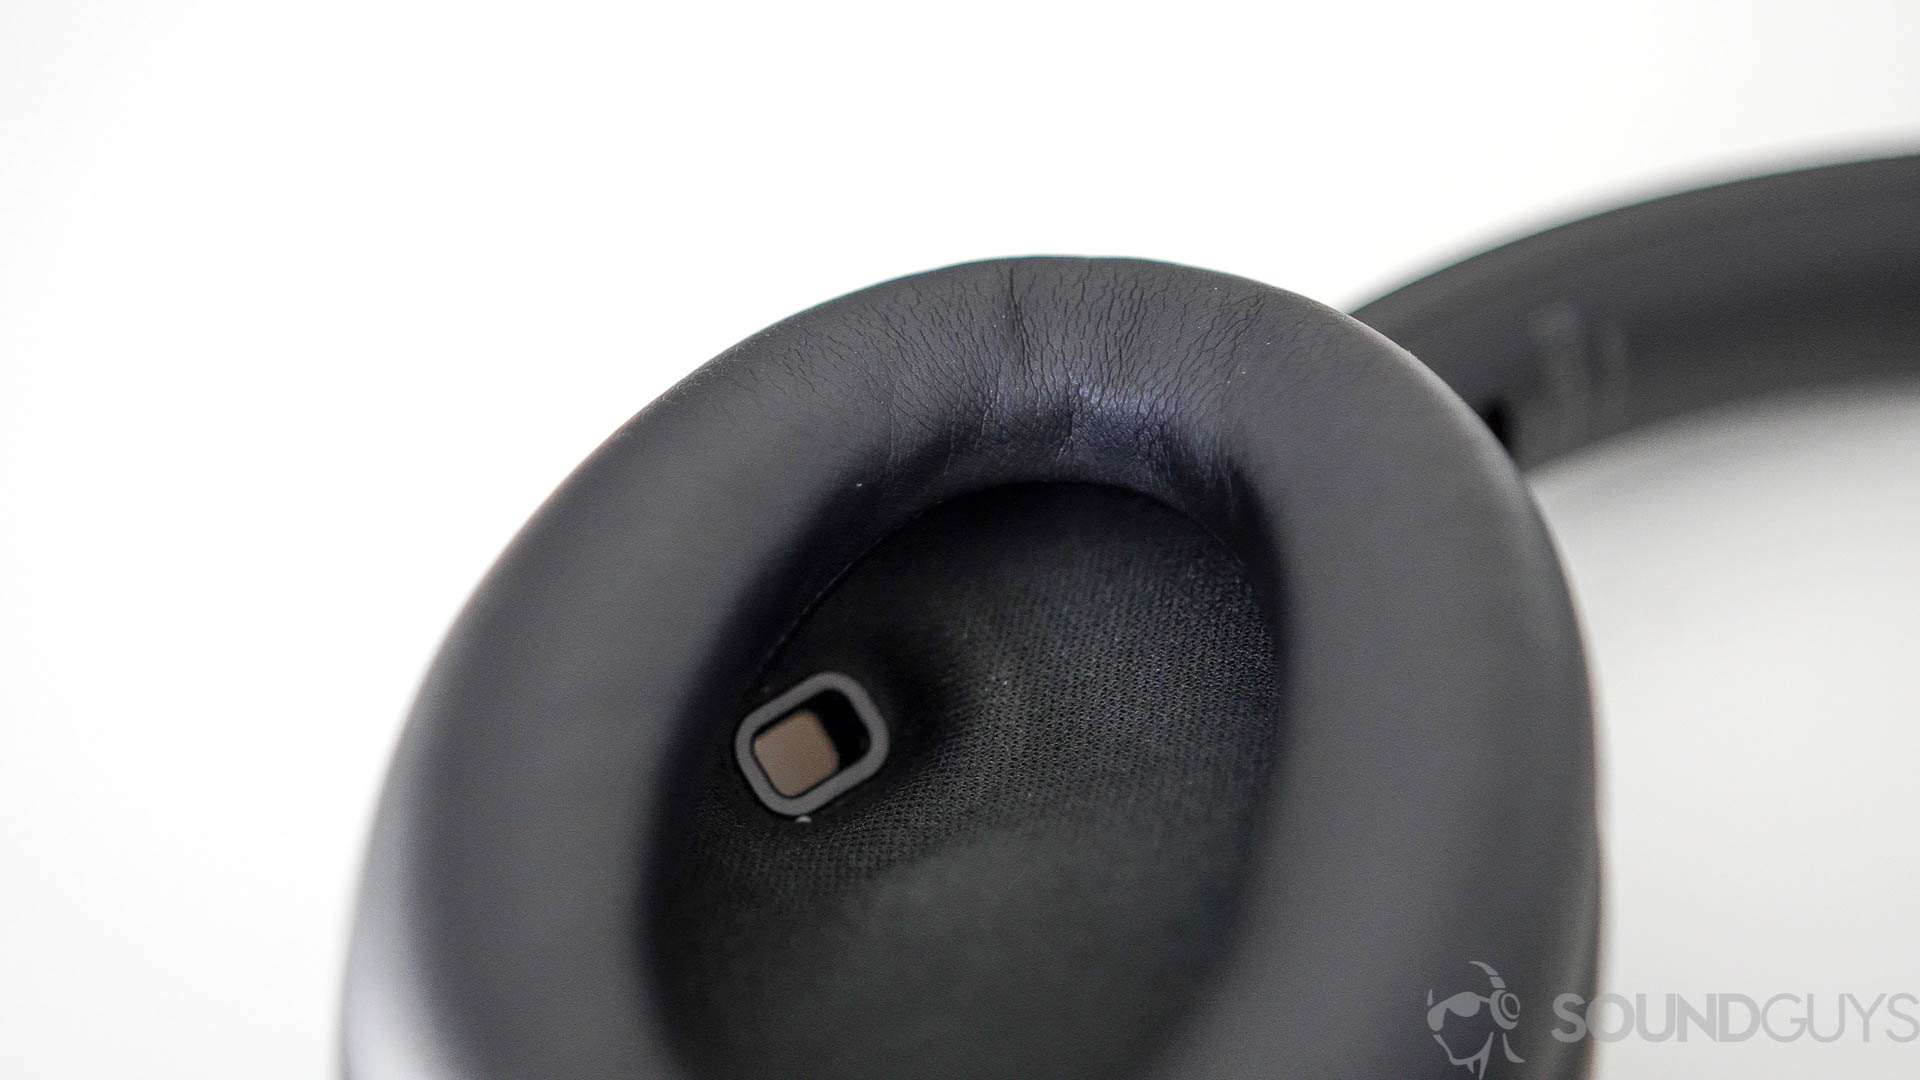 Close-up of the proximity sensor on the inside of the left earcup of the Sony WH-1000XM4 headphones.